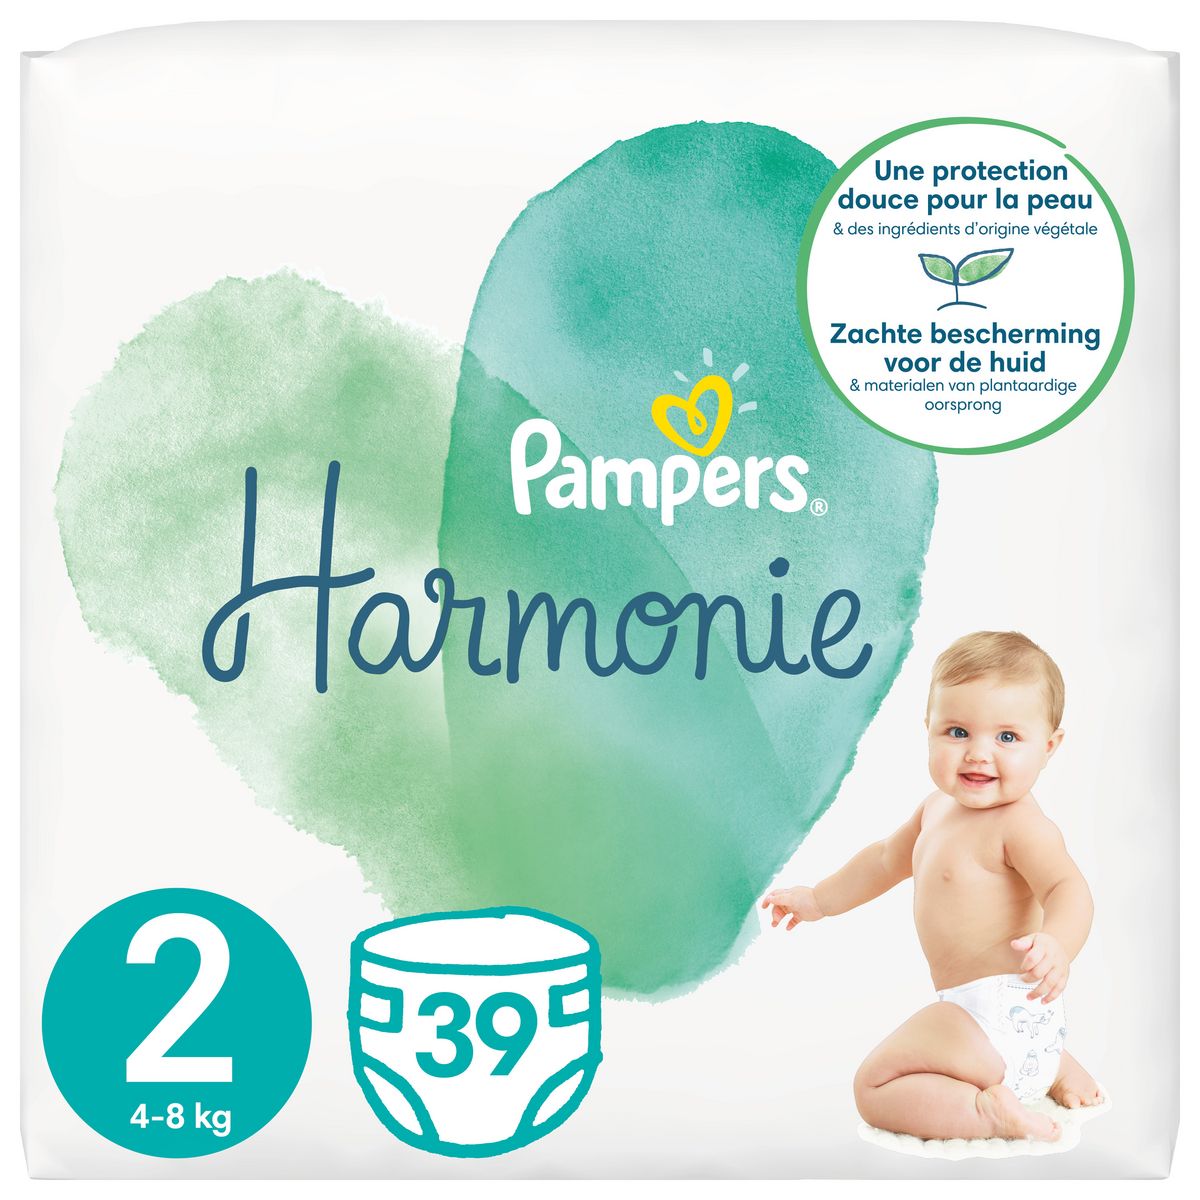 PAMPERS Harmonie couches taille 2 (4-8kg) 39 couches pas cher 